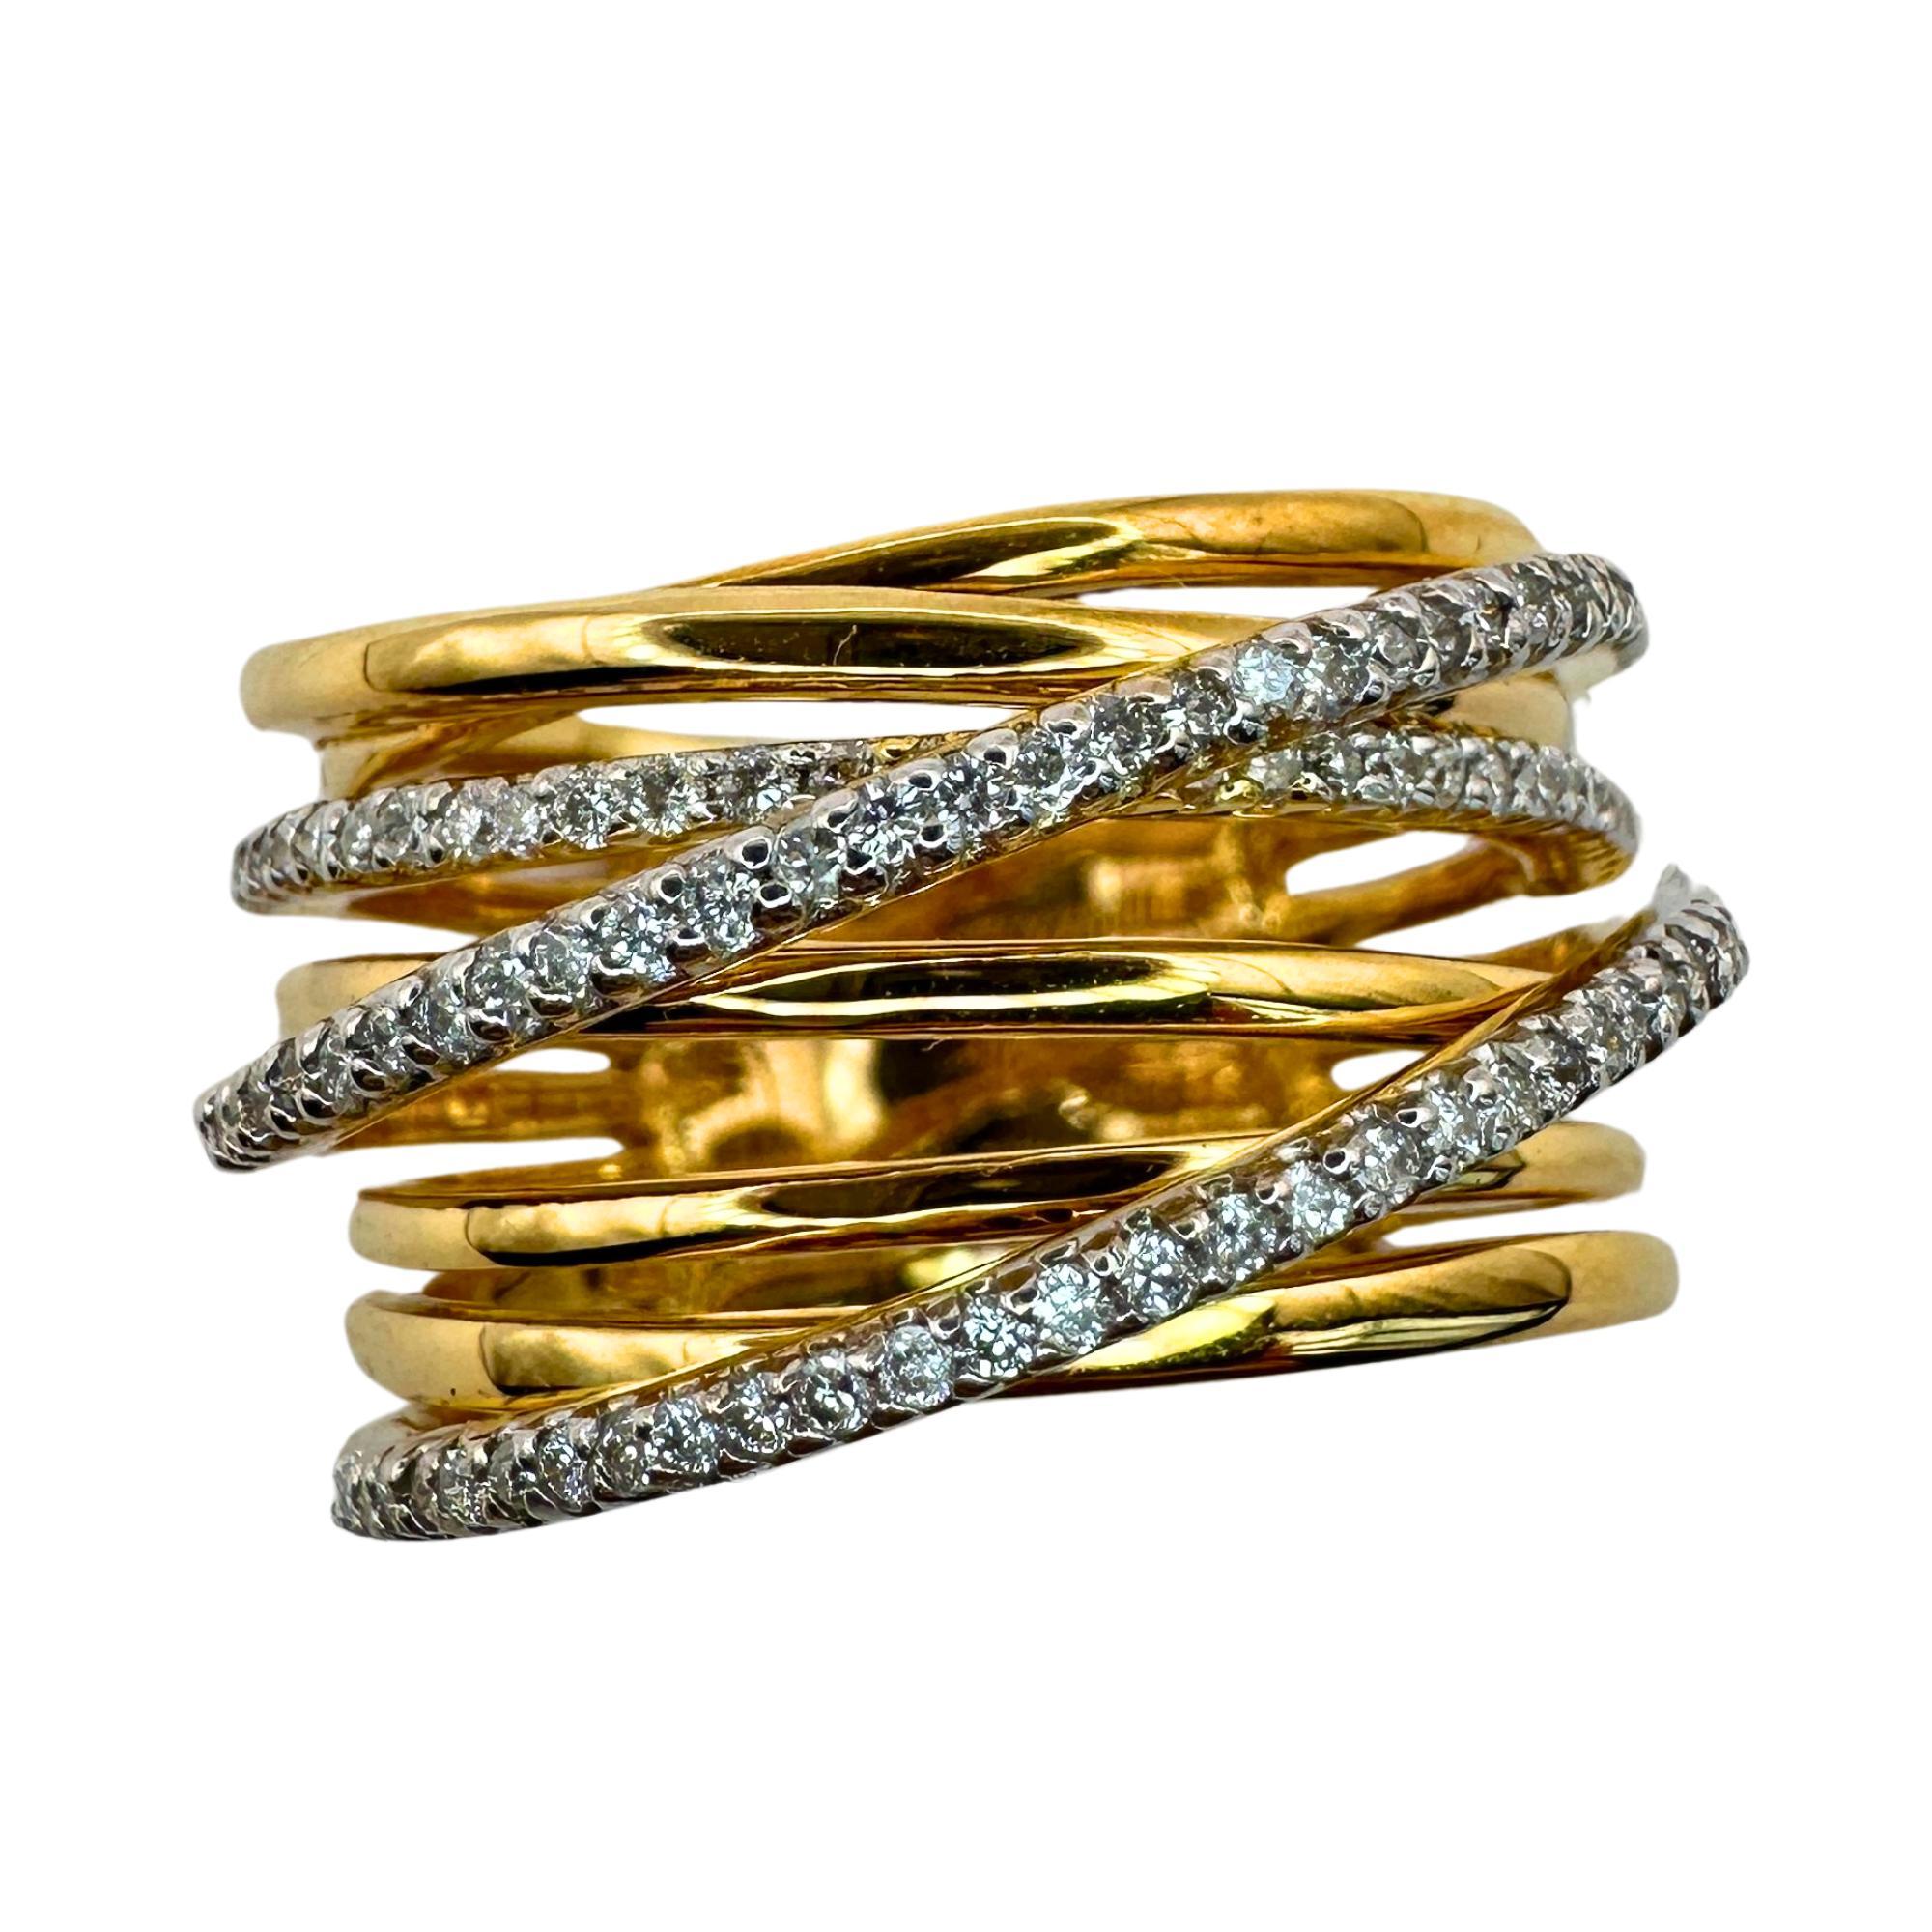 This stunning 18k yellow gold ring features a wide band design that creates a unique and eye-catching look. The crossover style adds a touch of elegance and the 0.46 carats of diamonds add a touch of sparkle. In good condition with a weight of 11.7